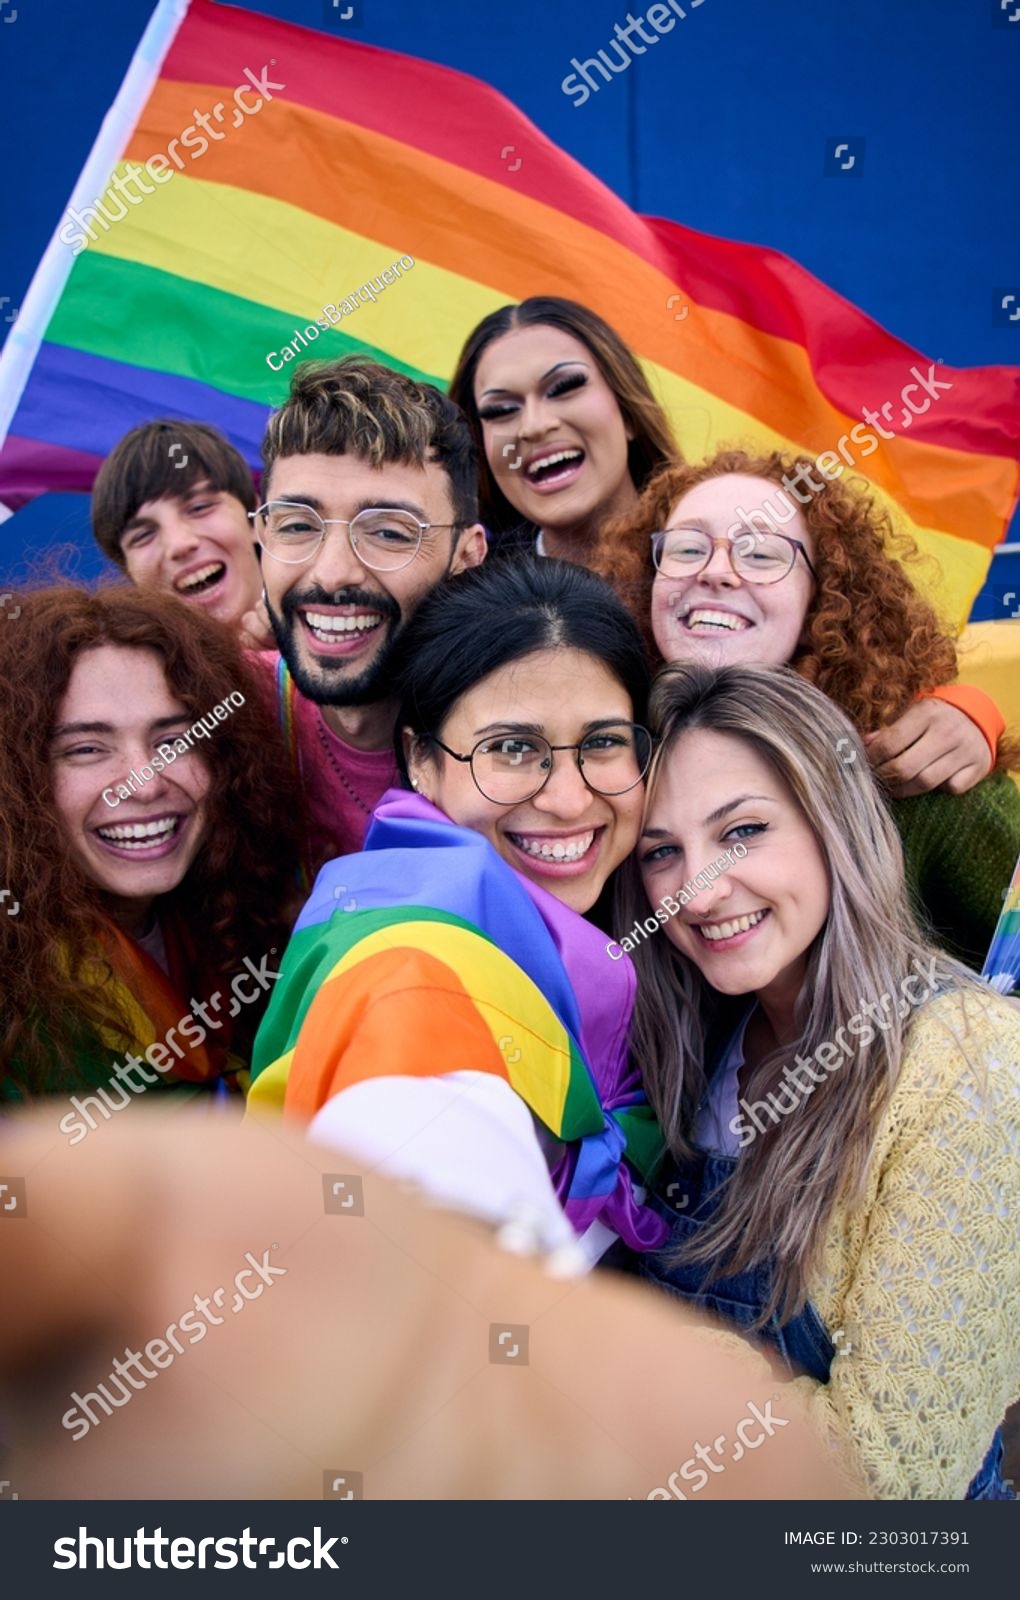 Vertical selfie of LGBT group of young people celebrating gay pride day holding rainbow flag together. Homosexual community smiling taking cheerful self portrait. Lesbian couple friends generation z. #2303017391